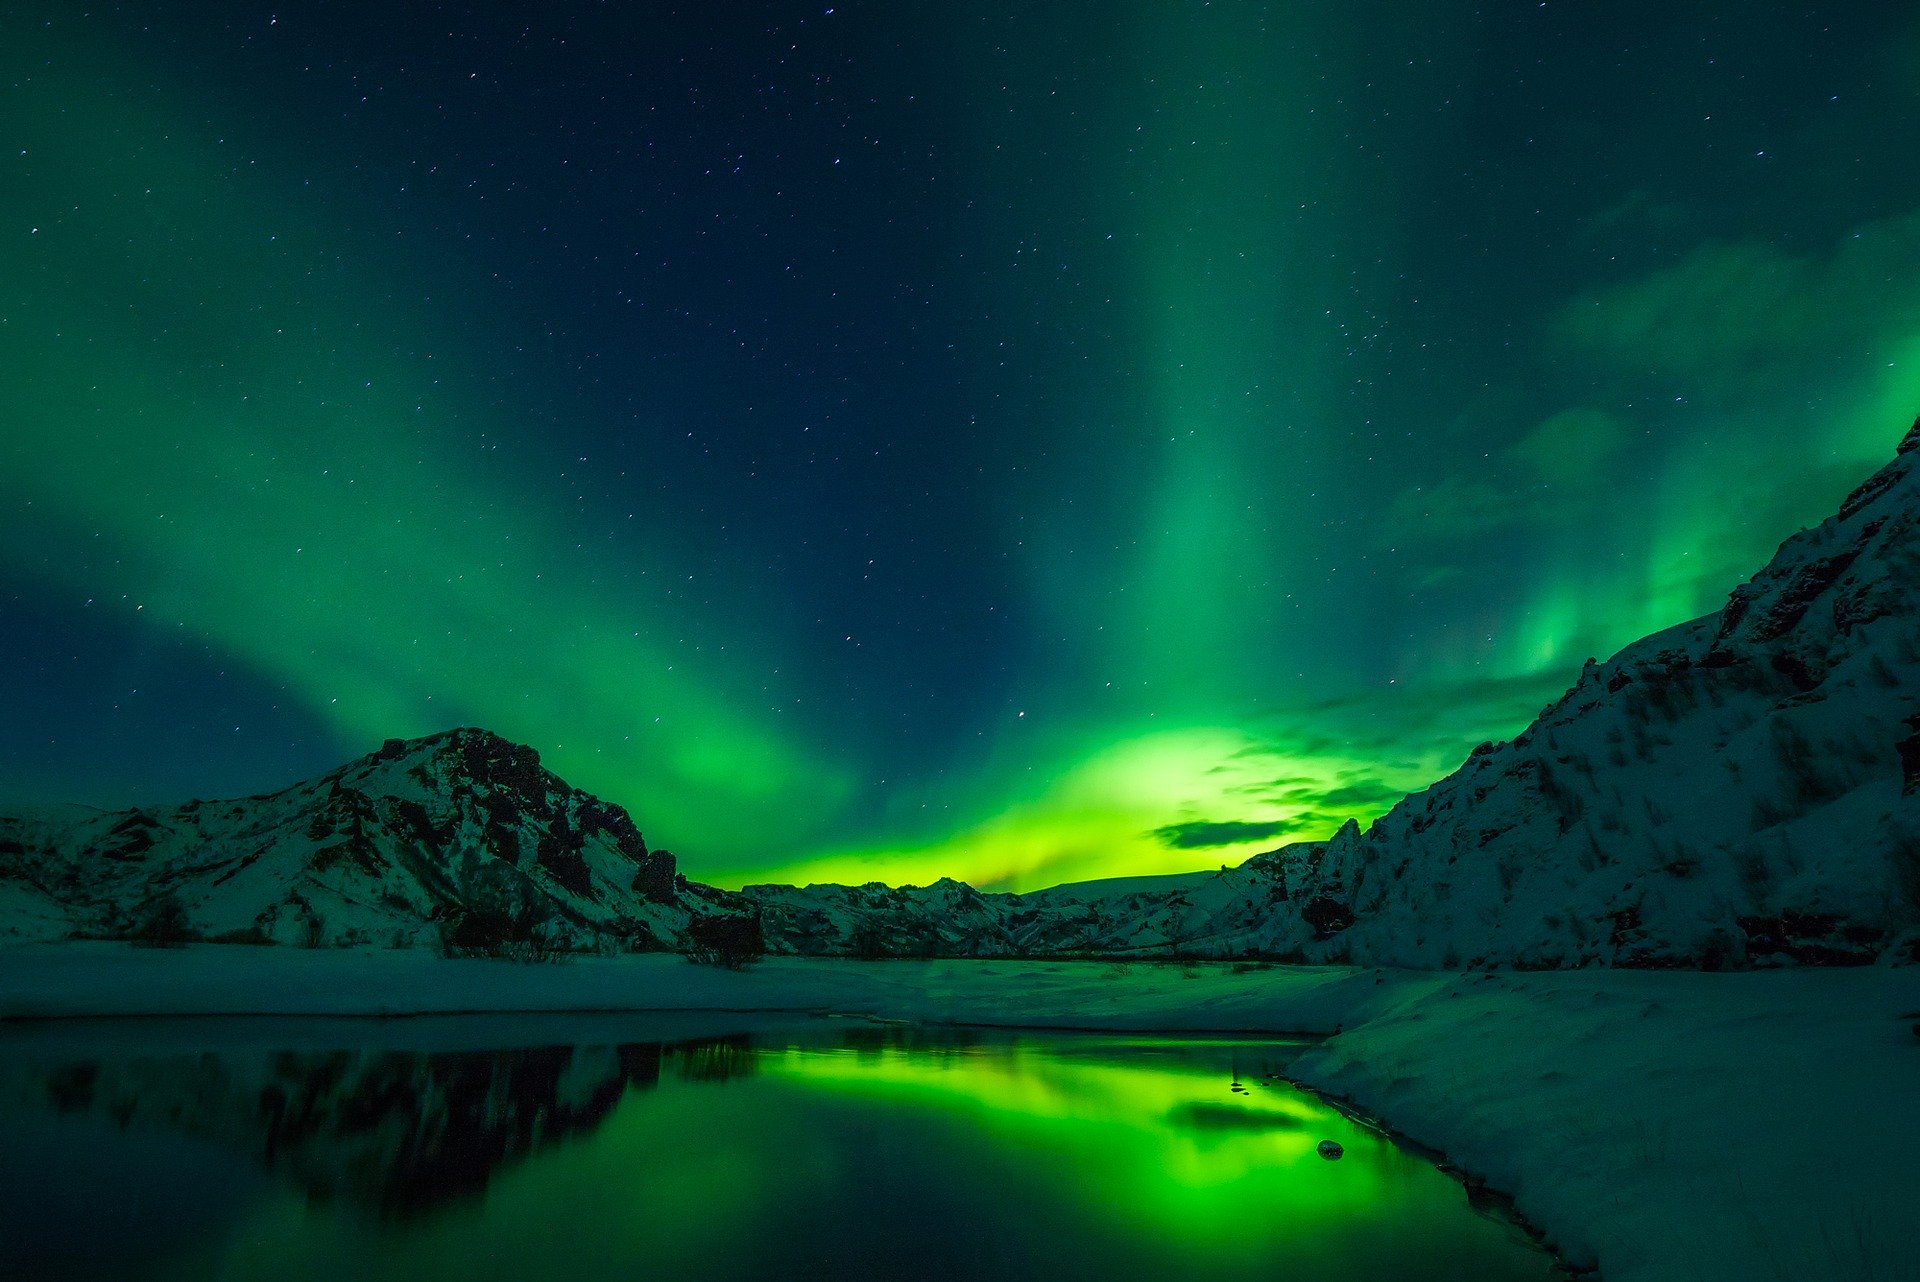 The Northern Lights captured with a long exposure